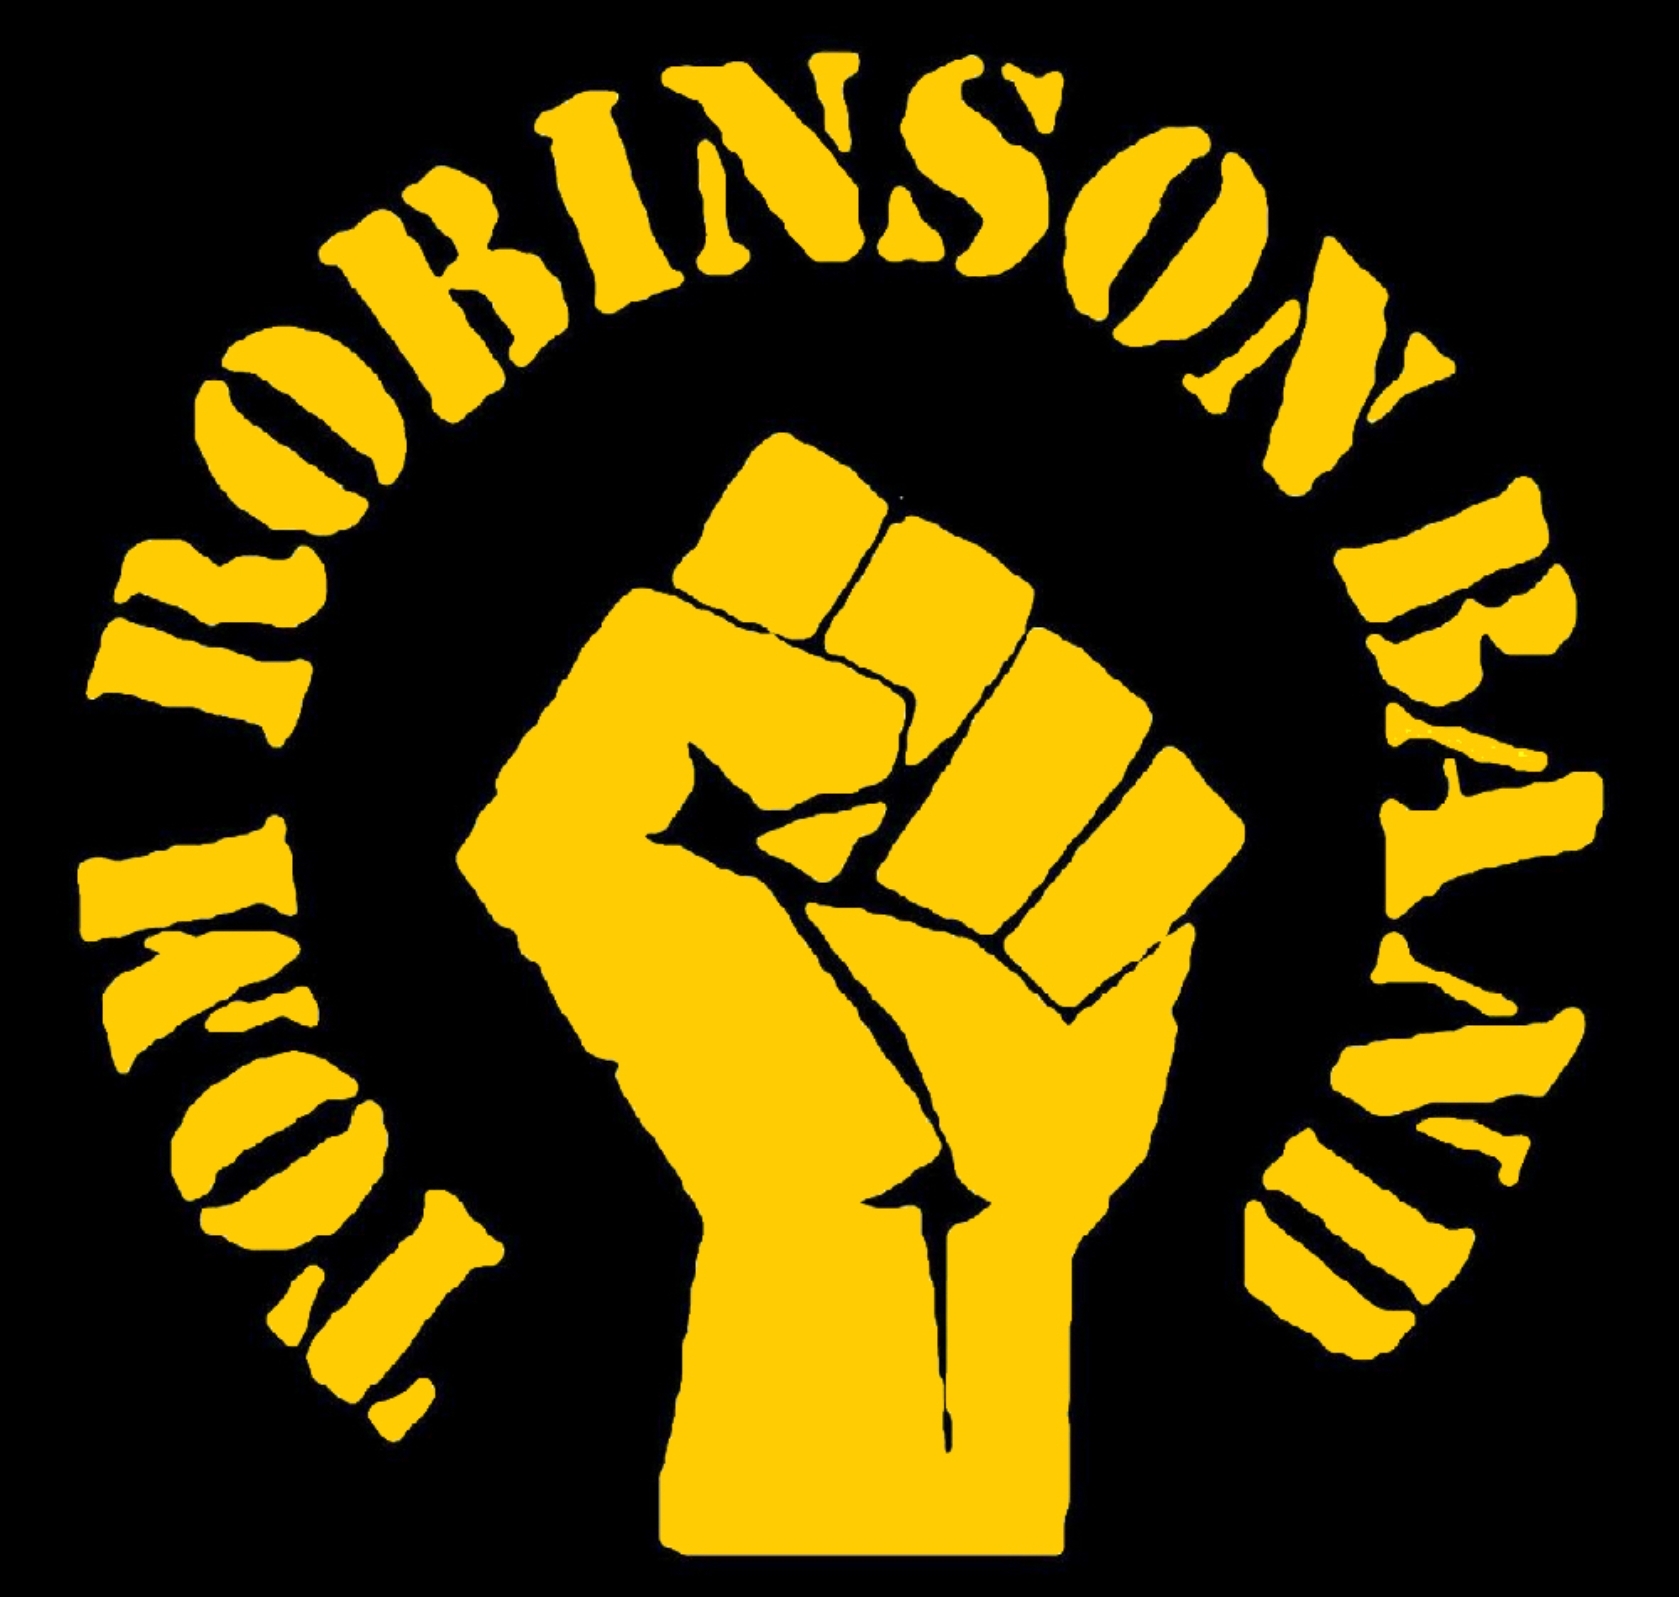 Tom Robinson Band at Brudenell Social Club Tickets